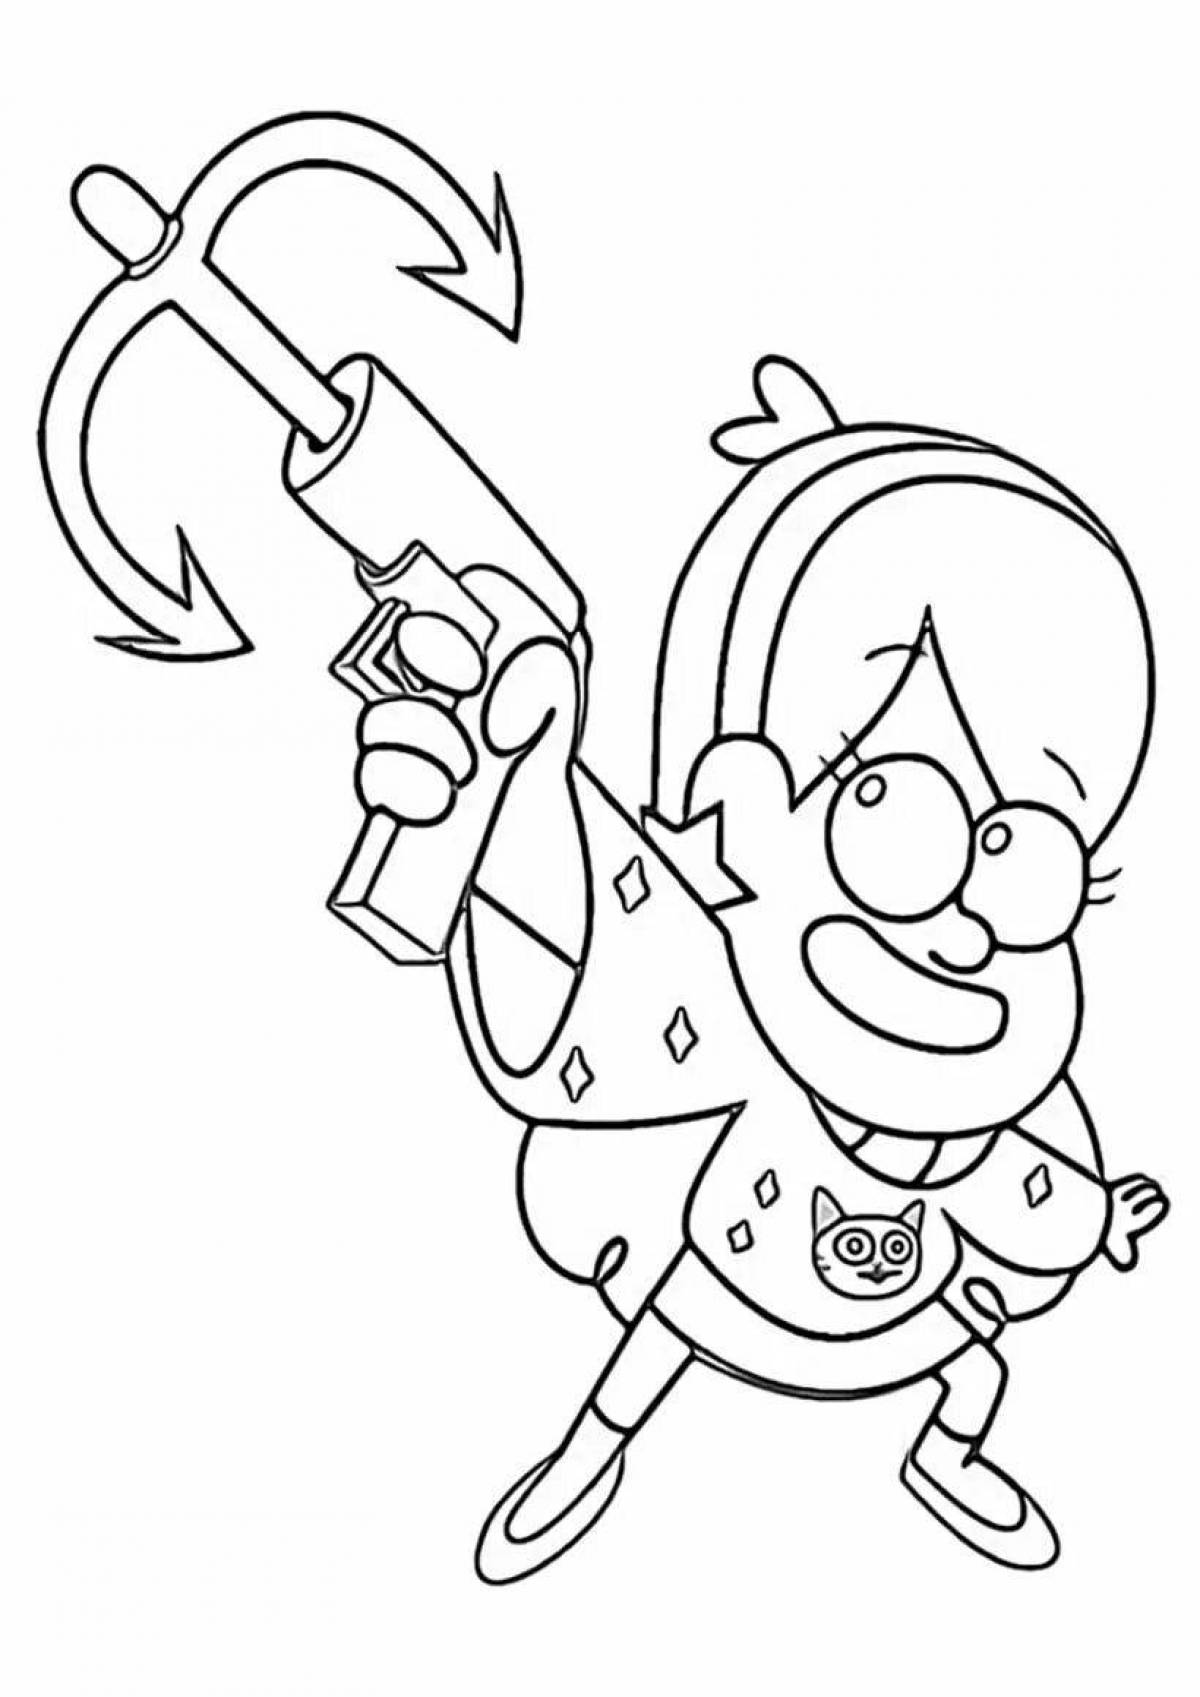 Gravity Falls Sparkling Coloring Page